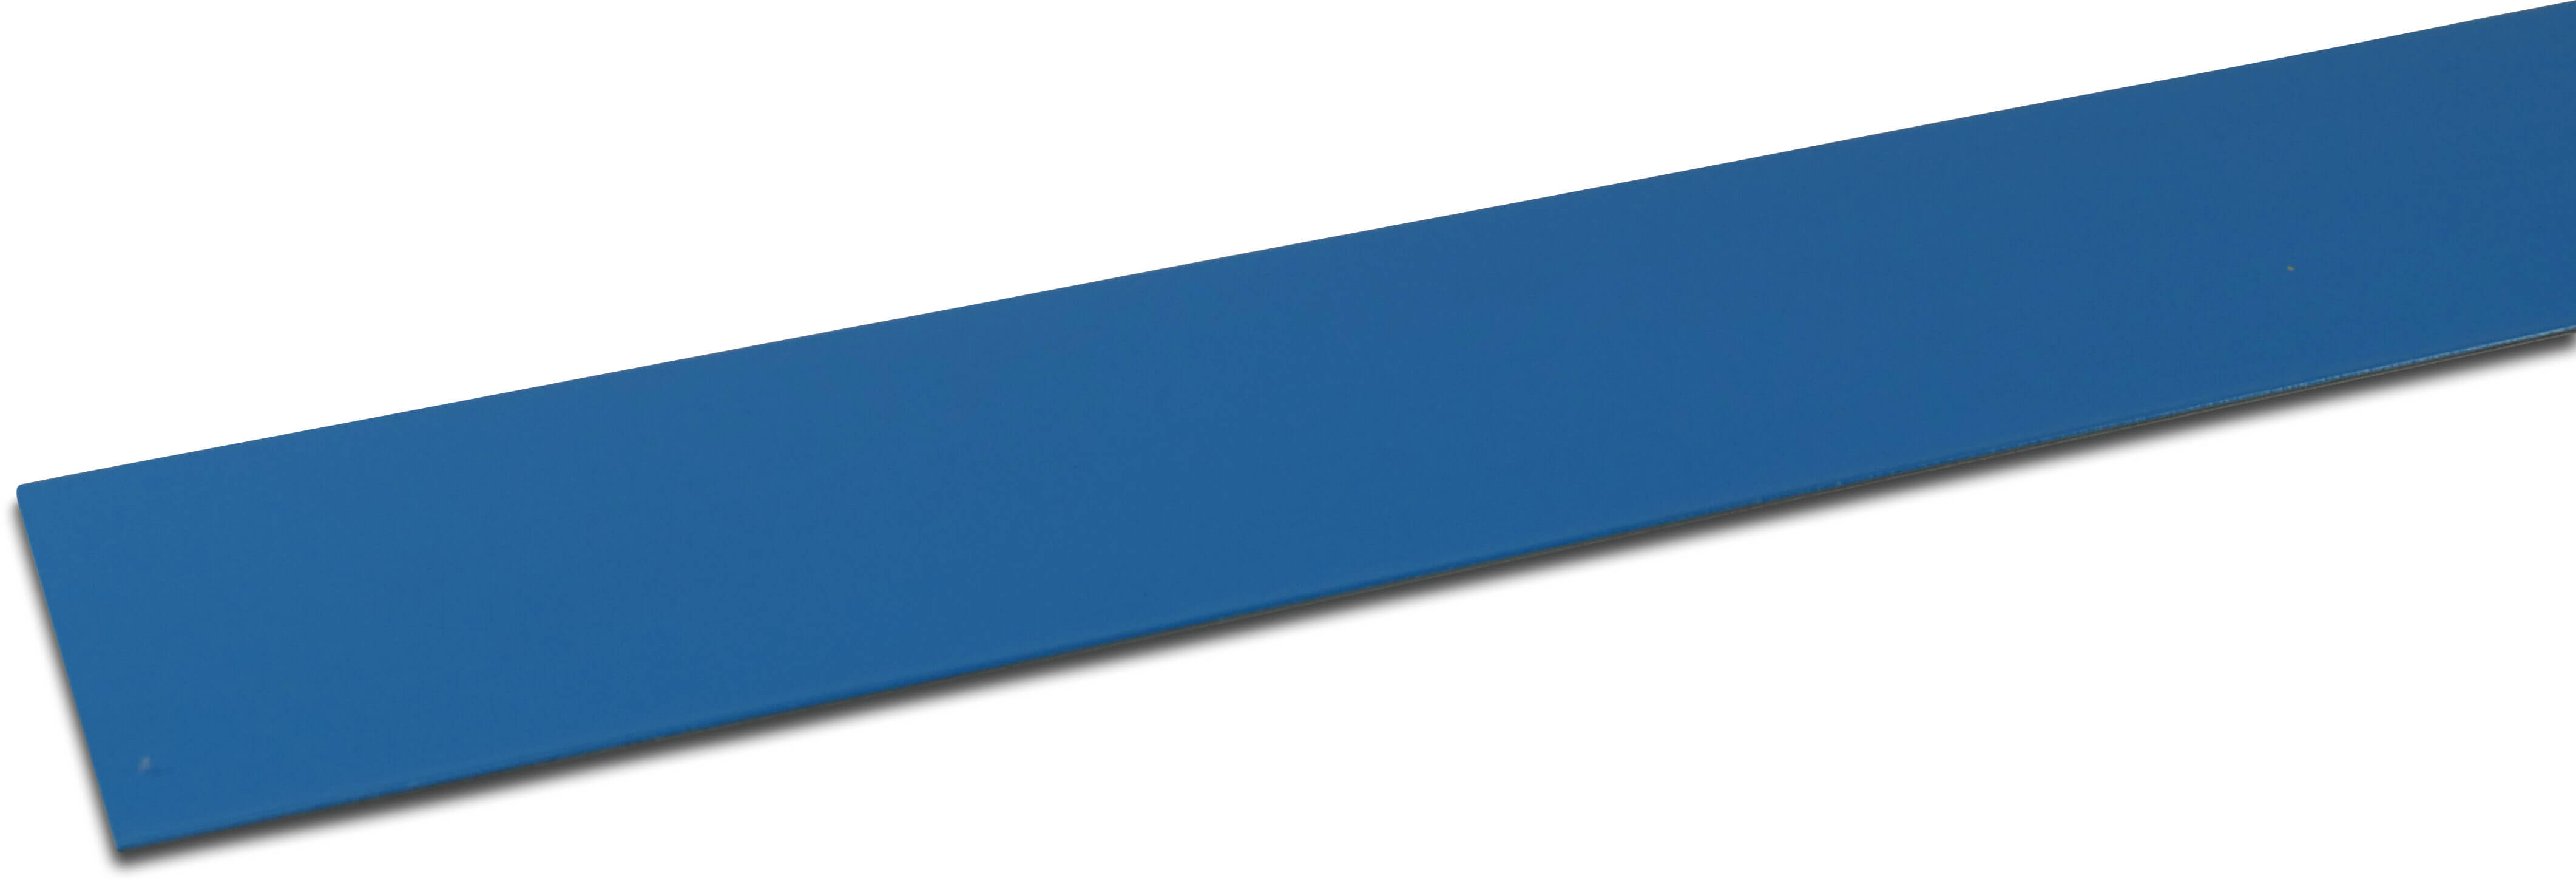 Elbe Profile PVC coated metal 50 mm x 50 mm x 2000 mm blue 2m type Interior angle